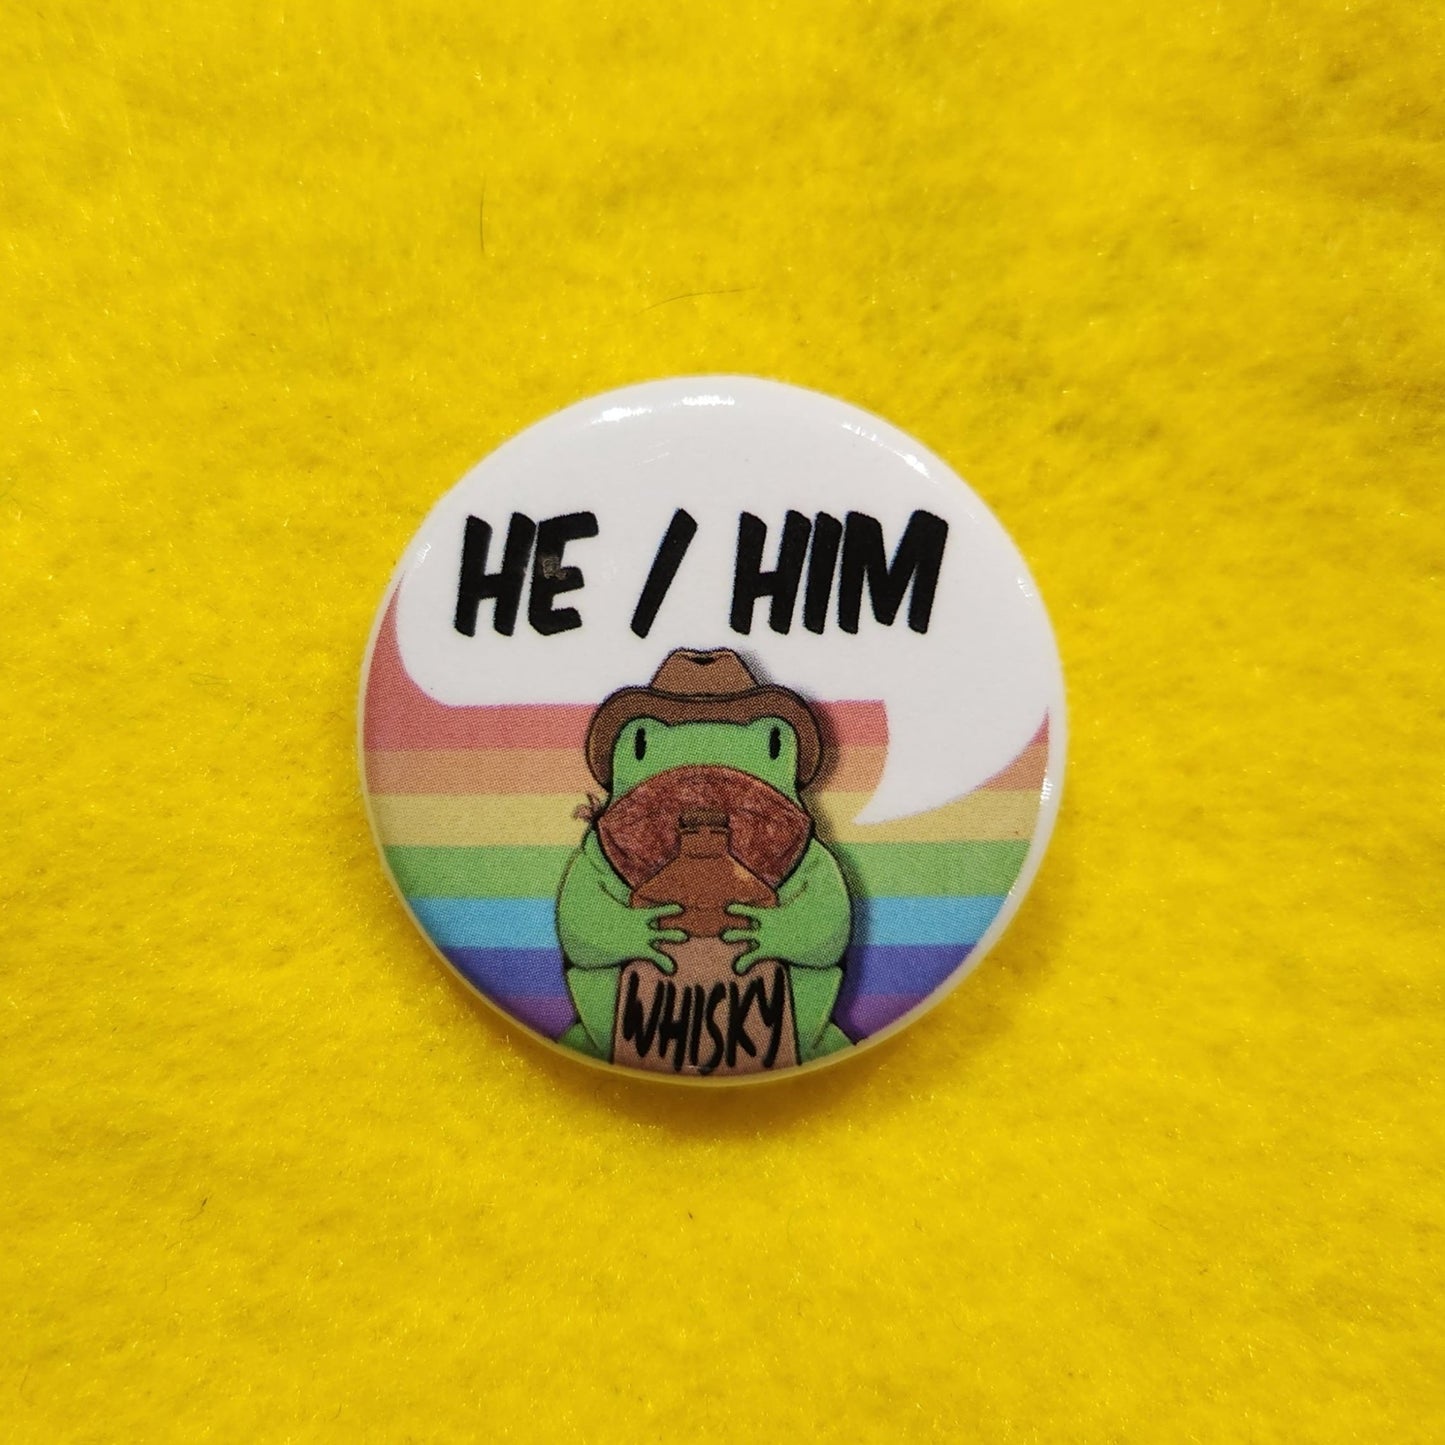 Whisky Frog Pronoun Button | HE/HIM | 1.25" - Deviantkreations